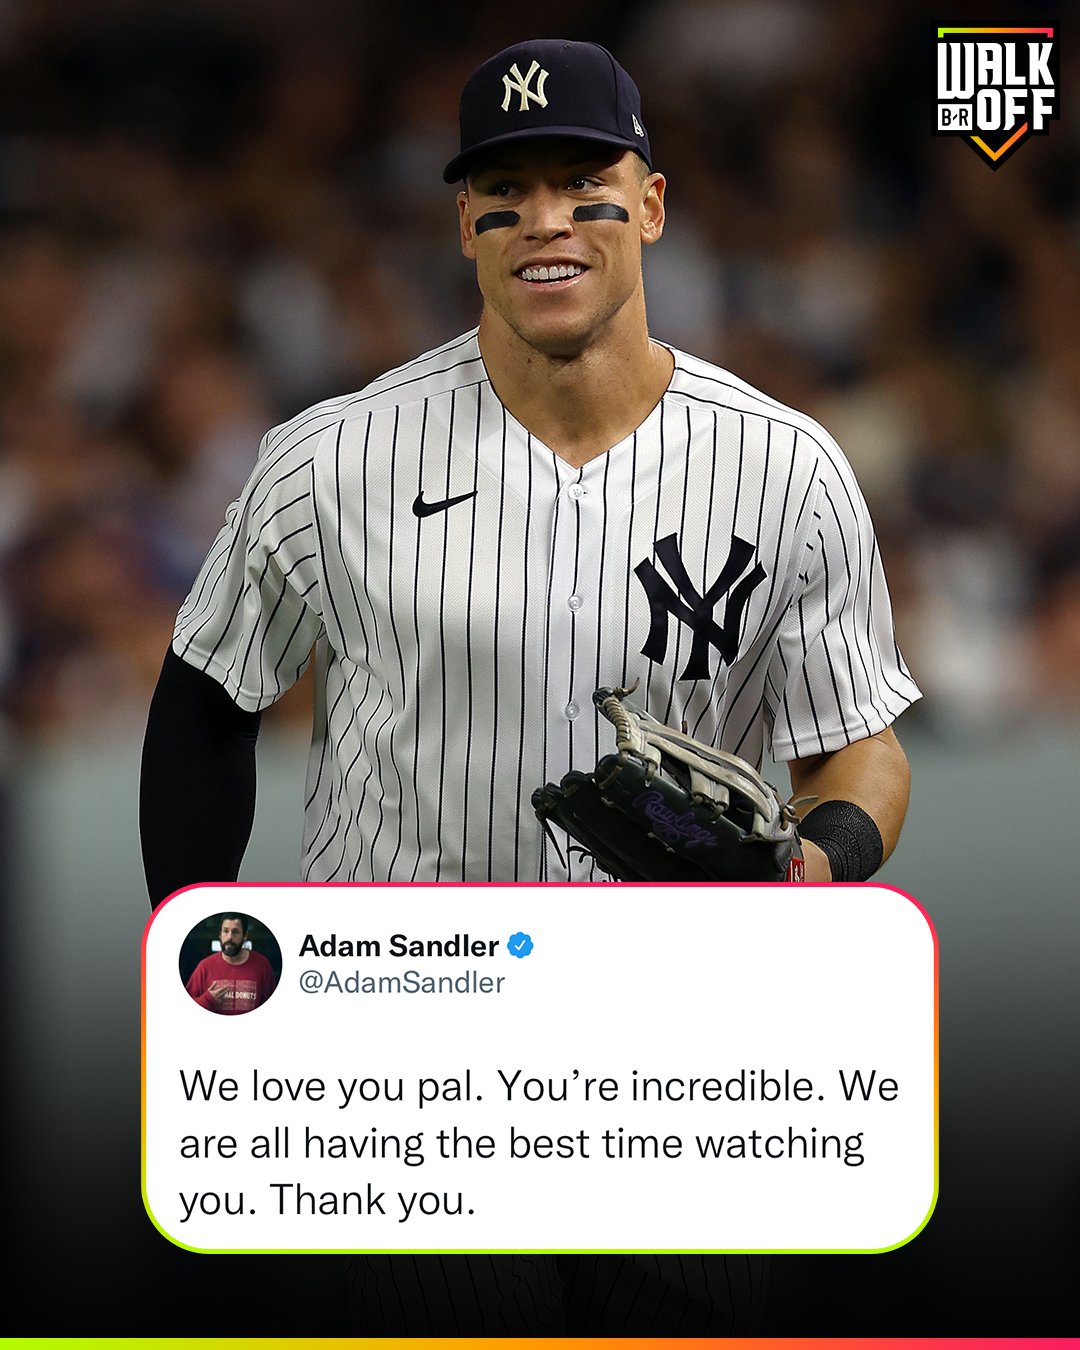 MLB - That's quacktastic! 🦆 Adam Sandler had a message for Aaron